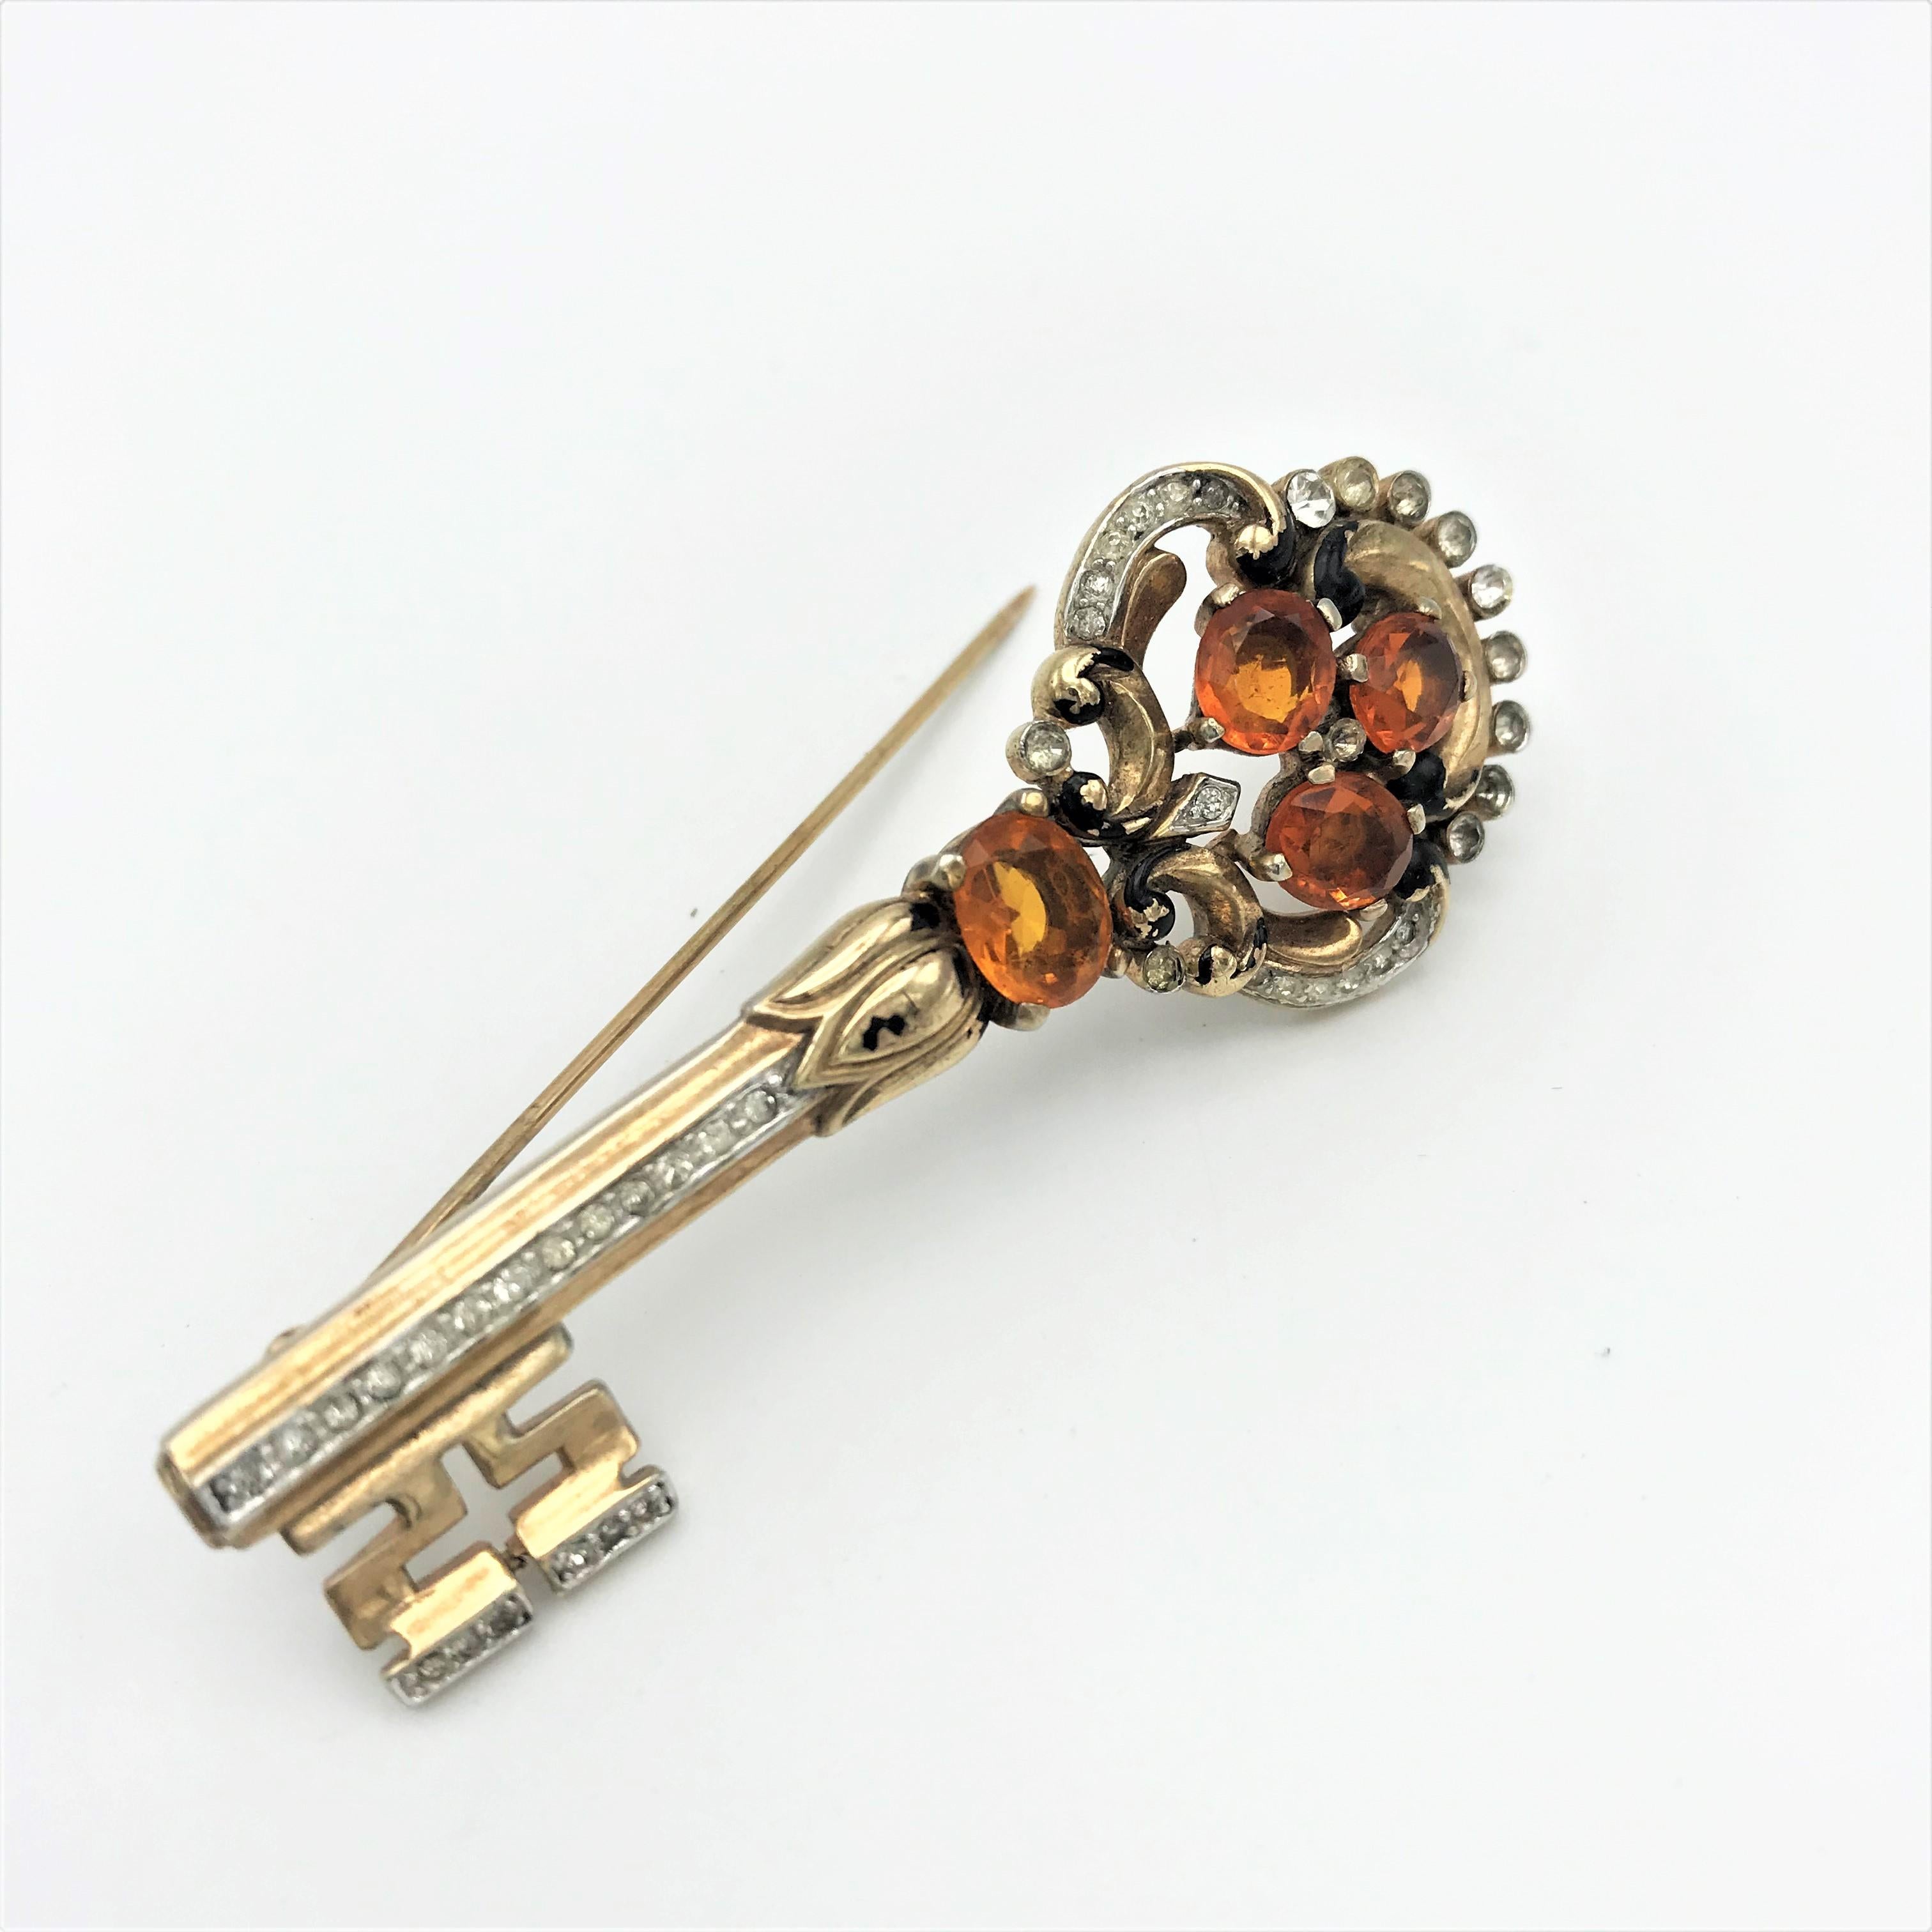 A popular motif in the 1940s was the key decorated with colored rhinestones in sterling and gold plated. Signed on the back TRIFARI   PAD PEN
Measurement: Length 7 cm/2,7,  width 2,5 cm/1